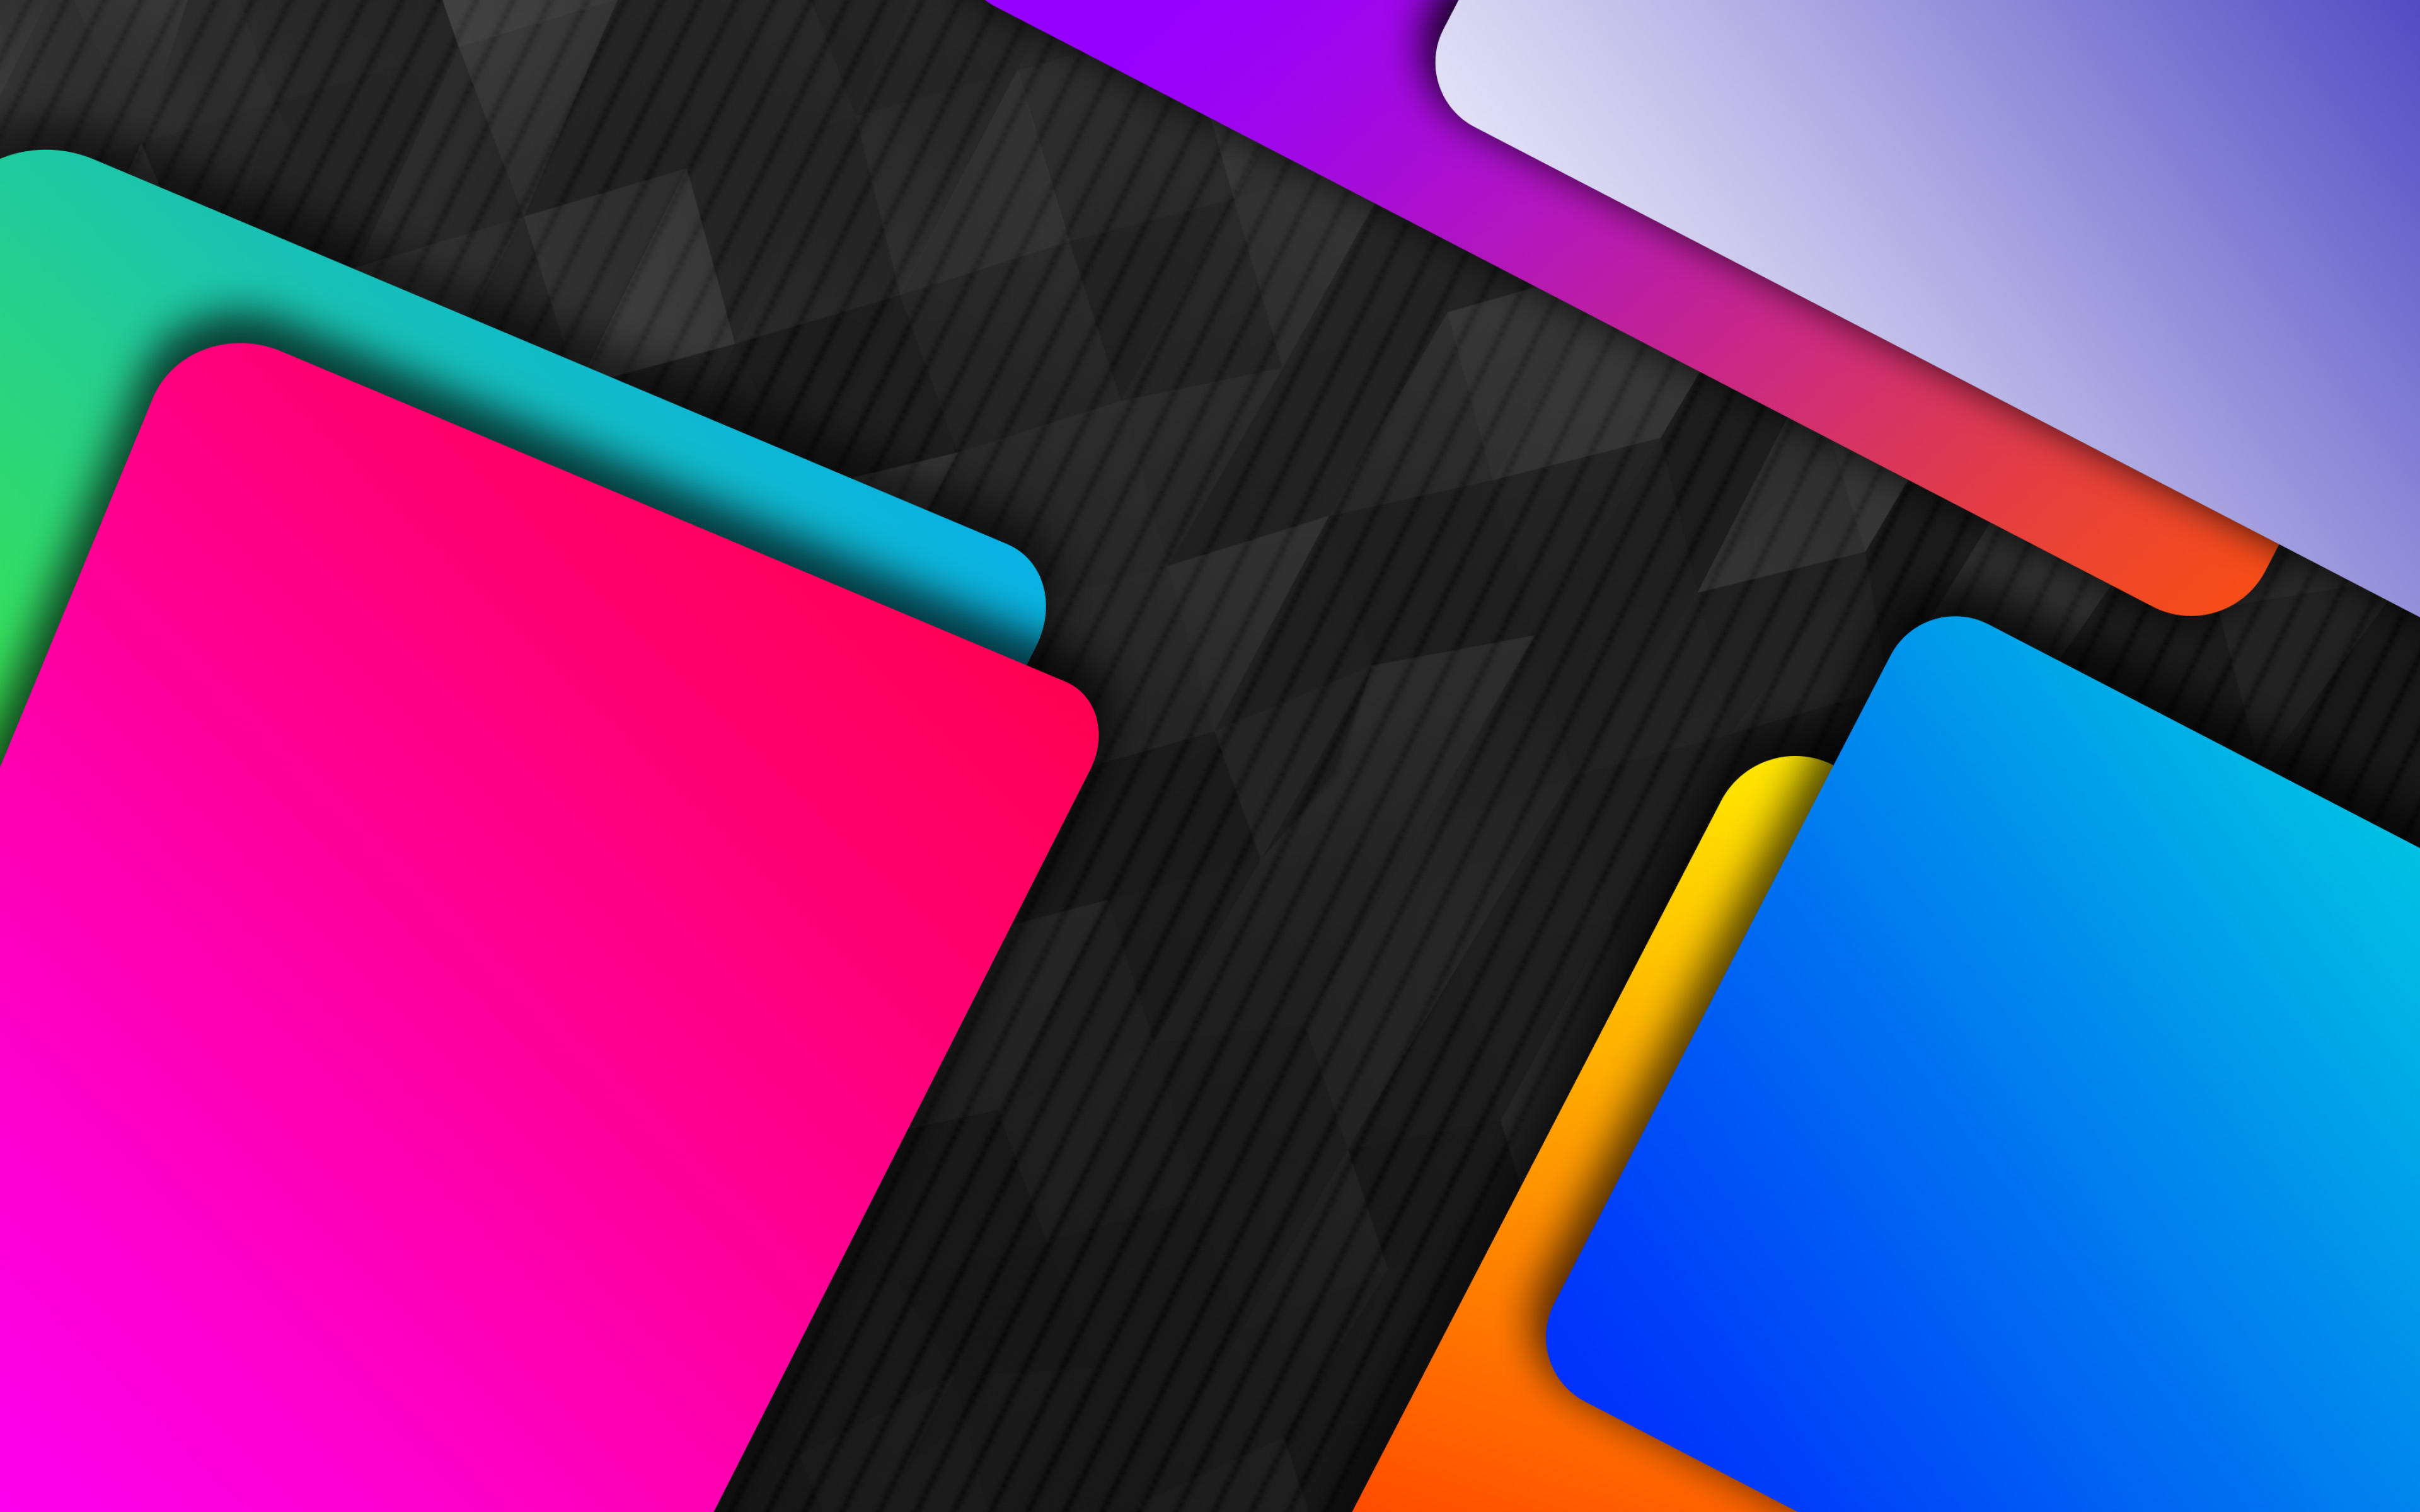 Download wallpaper colorful squares, 4k, android, creative, lollipop, geometric shapes, material design, geometry, abstract art, colorful background for desktop with resolution 3840x2400. High Quality HD picture wallpaper